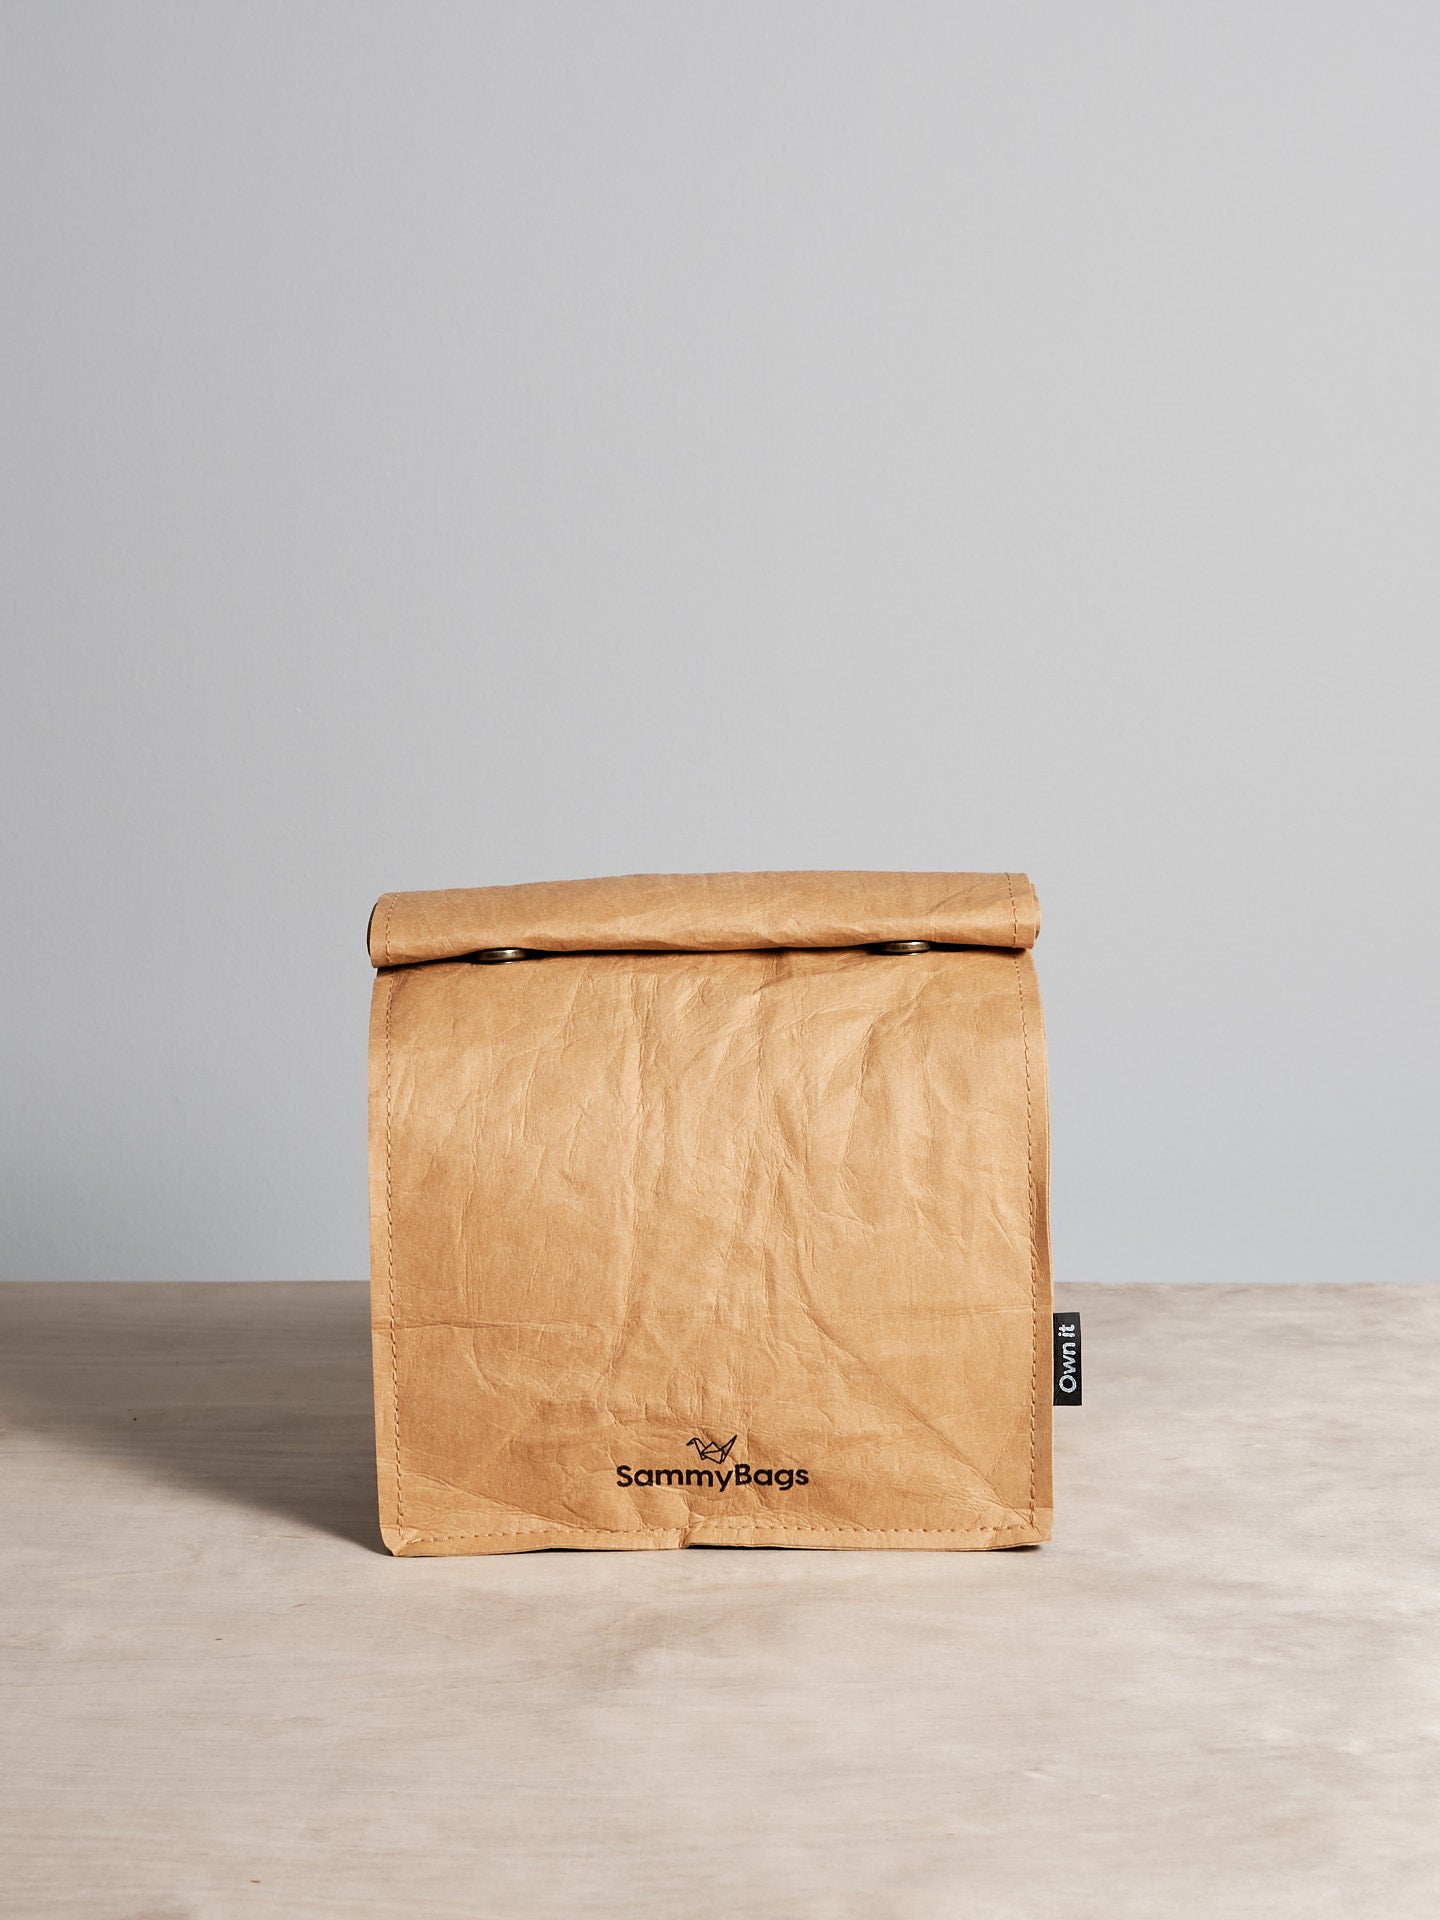 A Reusable Lunch Bag from Sammy Bags sitting on a wooden table.